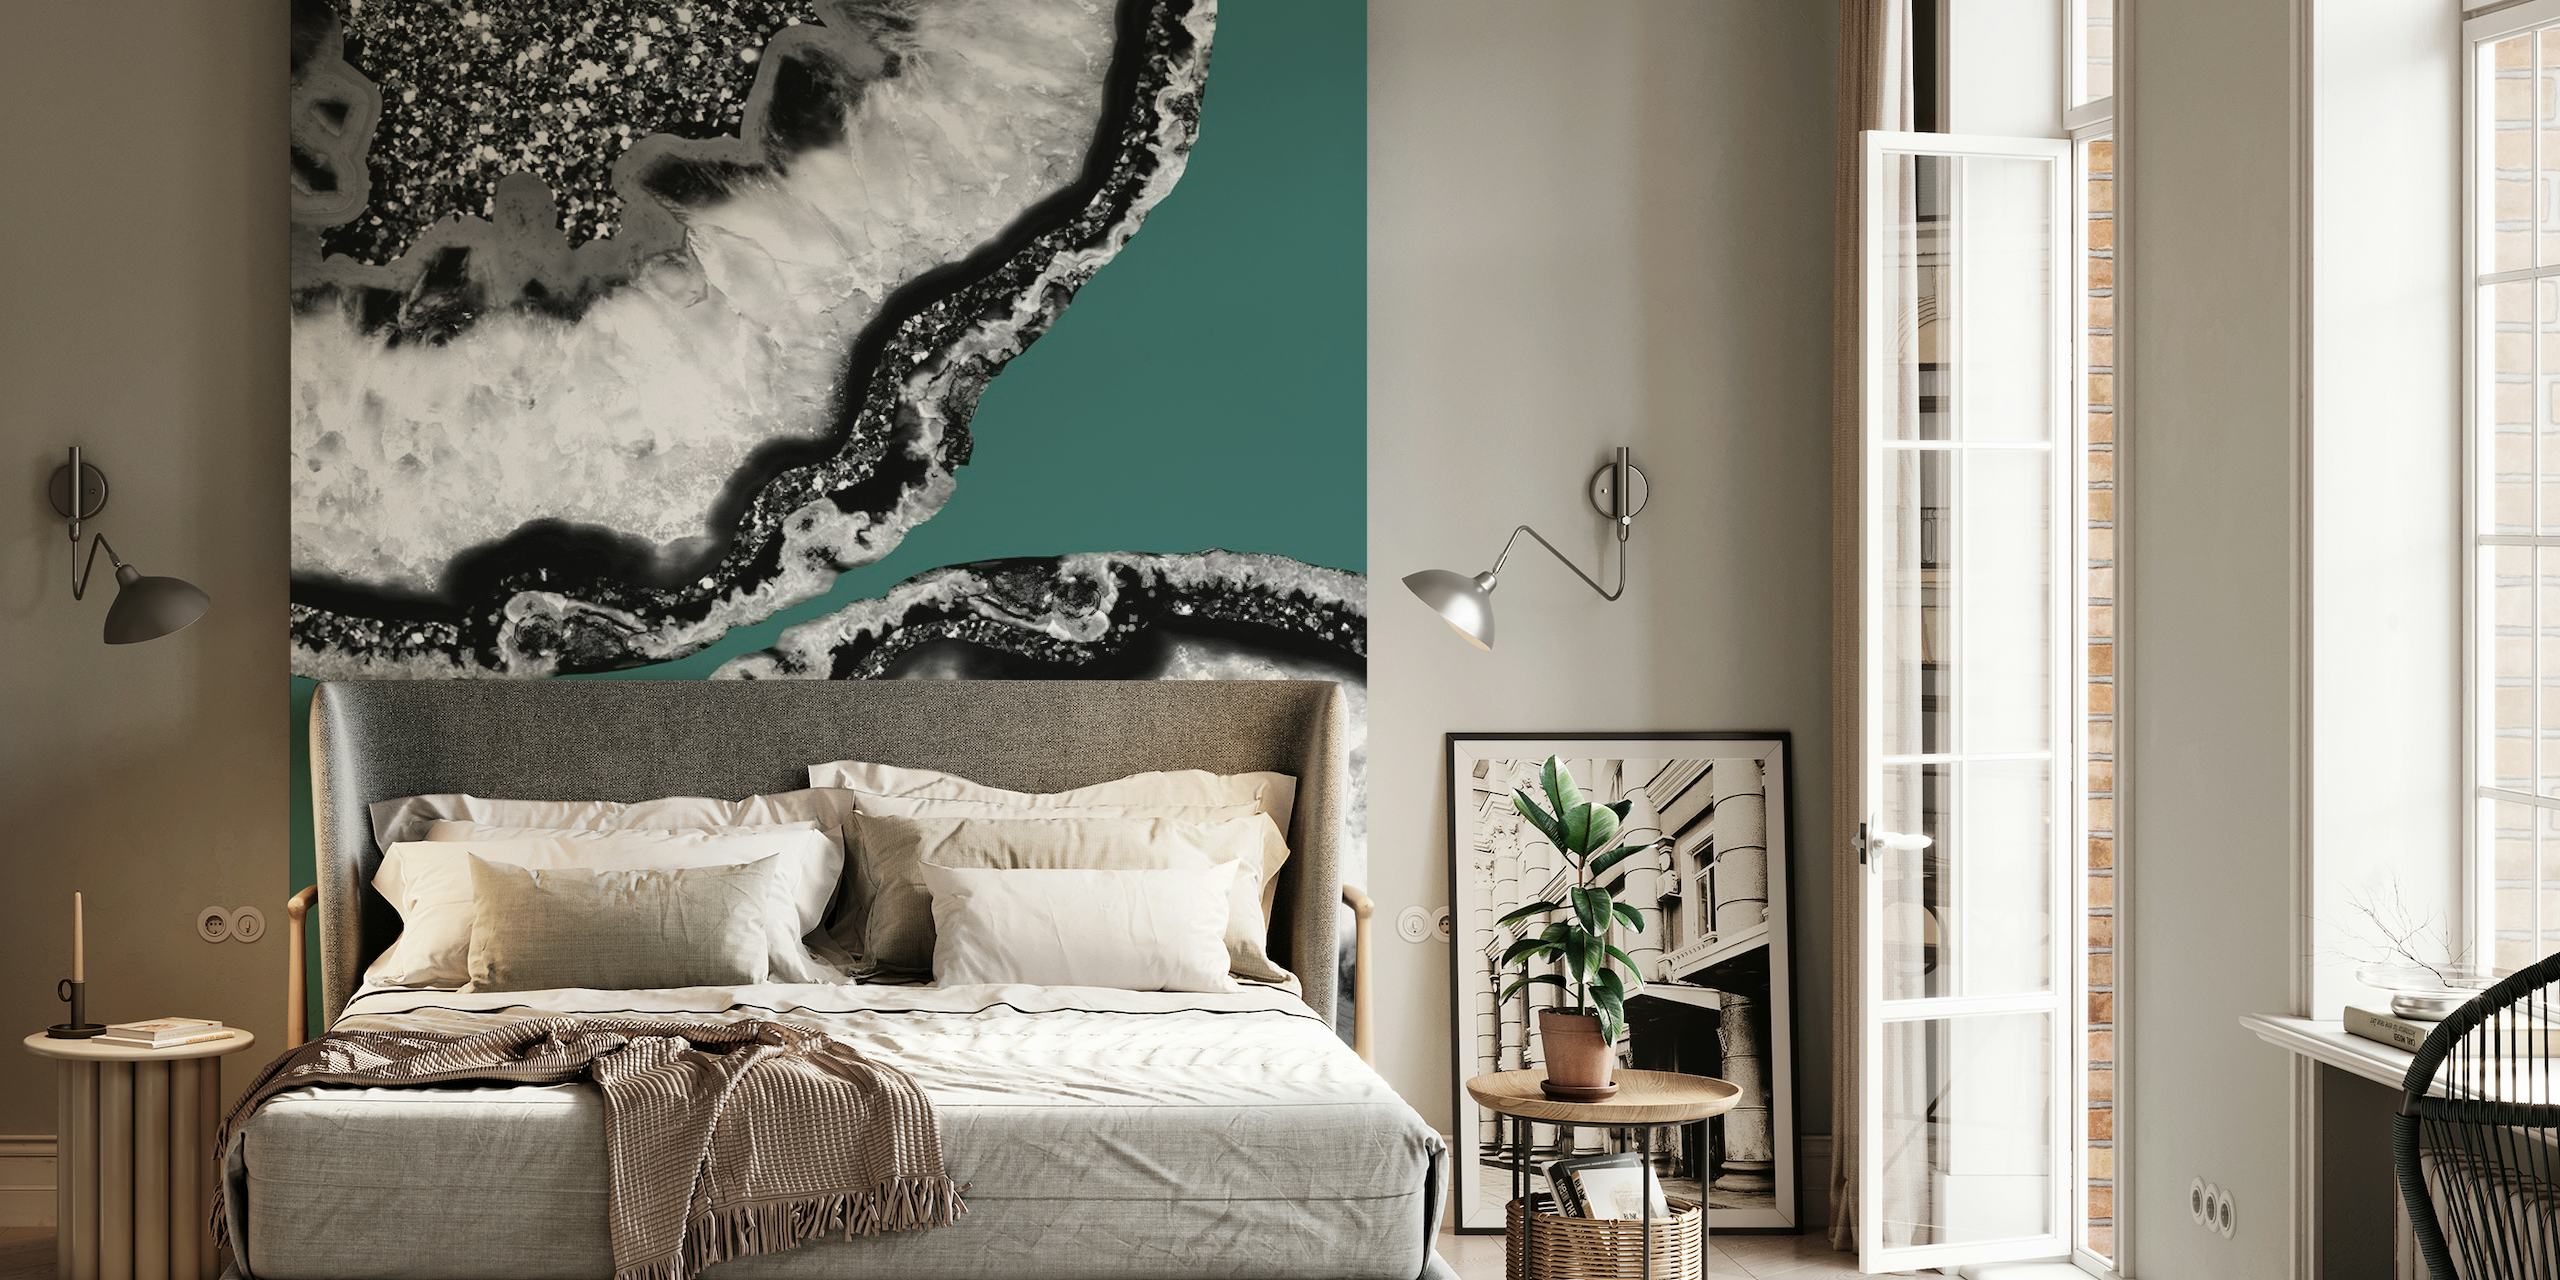 Yin Yang Agate Glitter Glam wall mural showing contrasting patterns